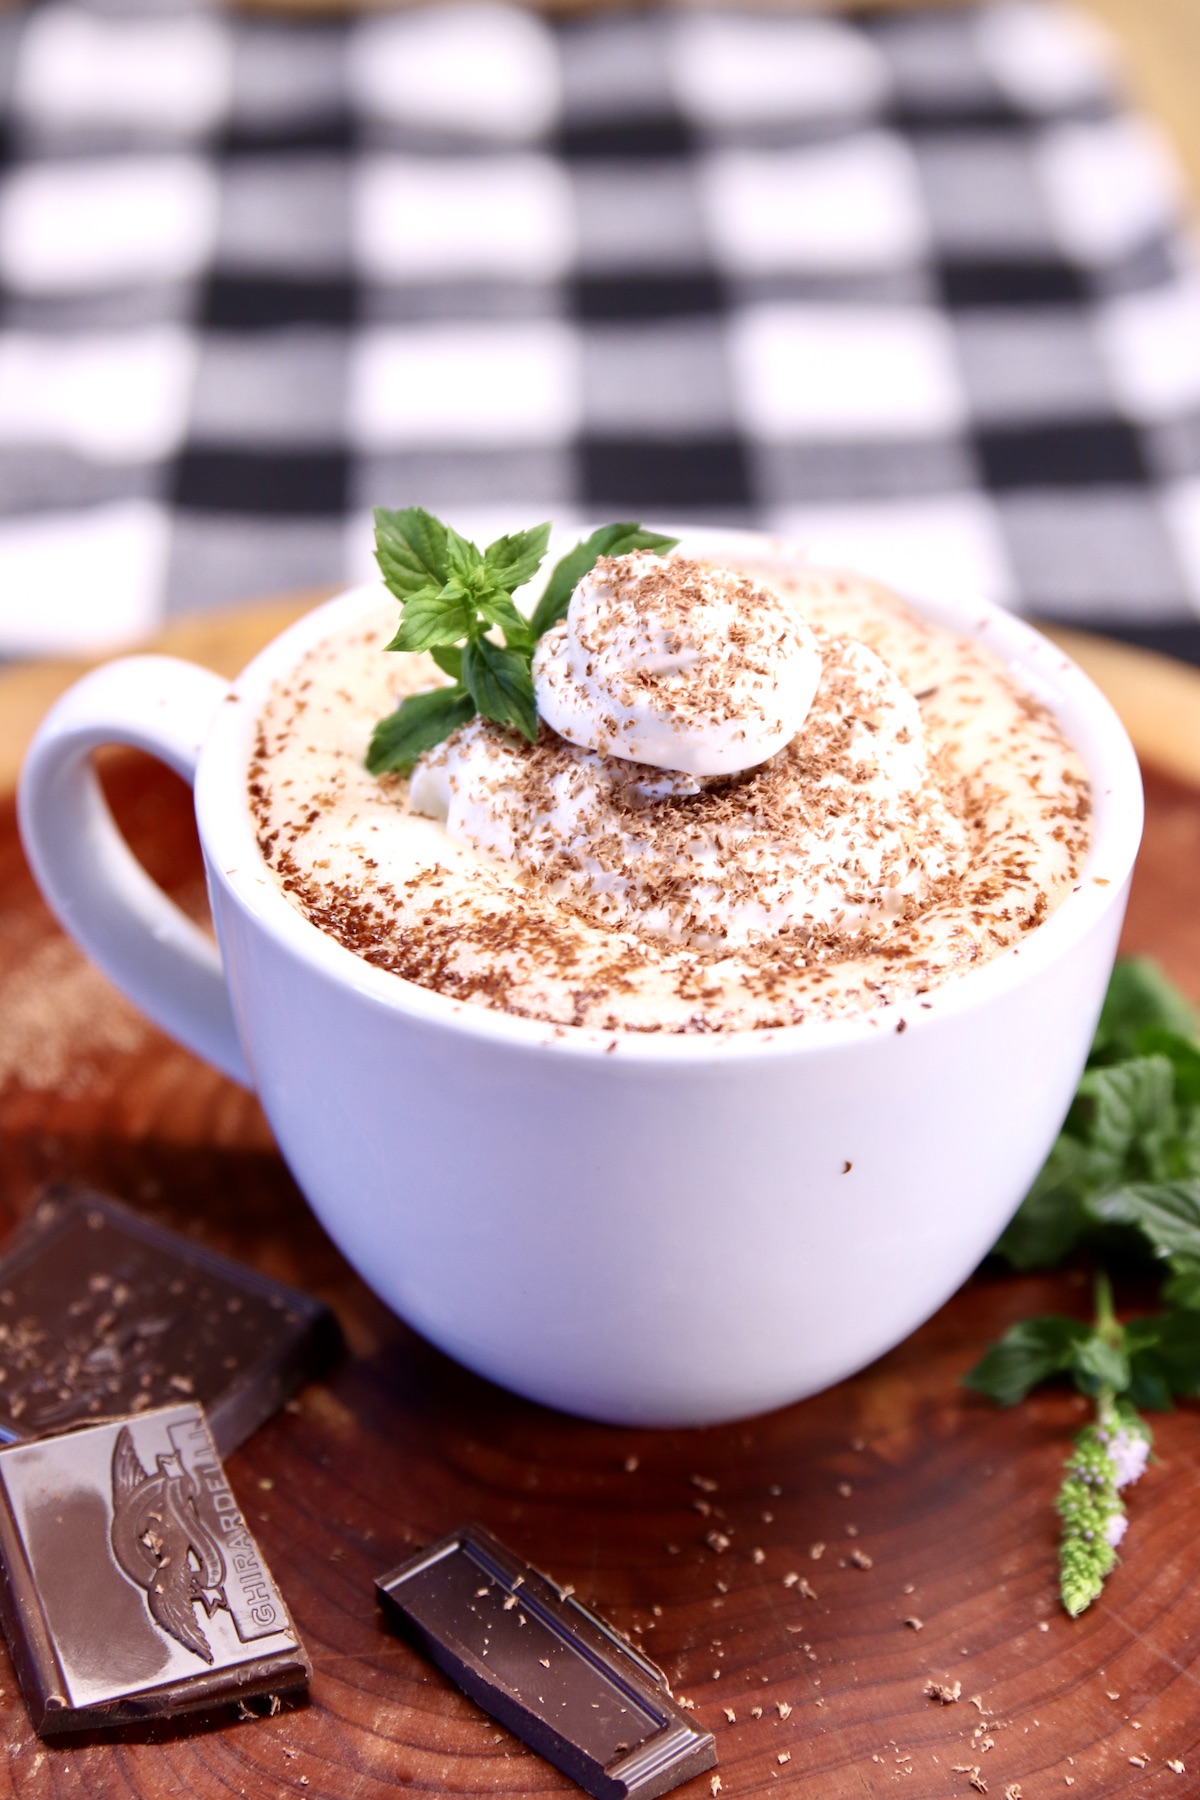 peppermint hot cocoa in a mug on a wood board with chocolate squares, fresh mint